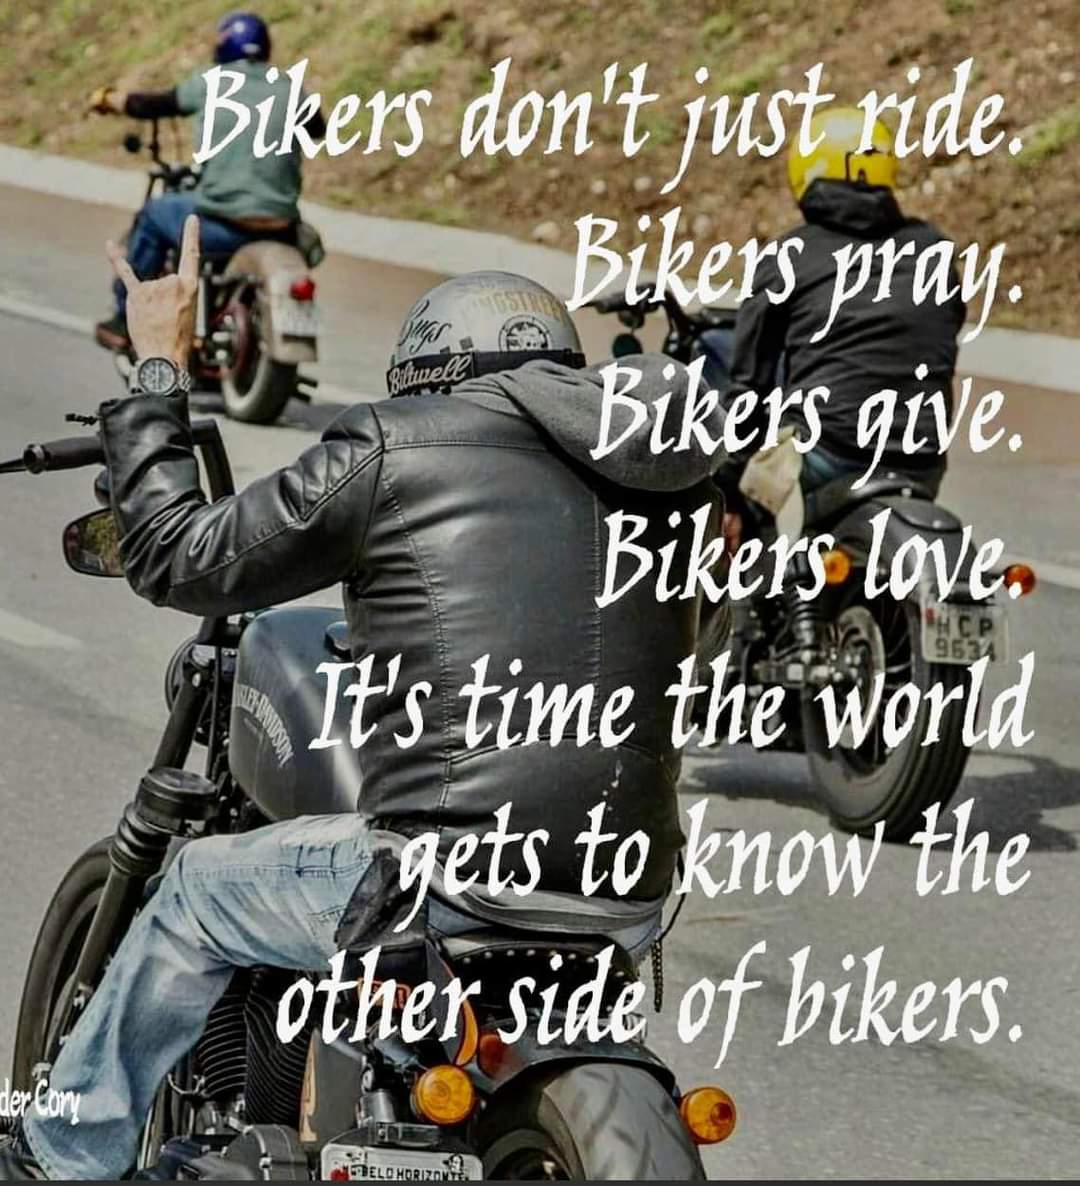 I'm proud to be a biker and Patriot🇺🇸